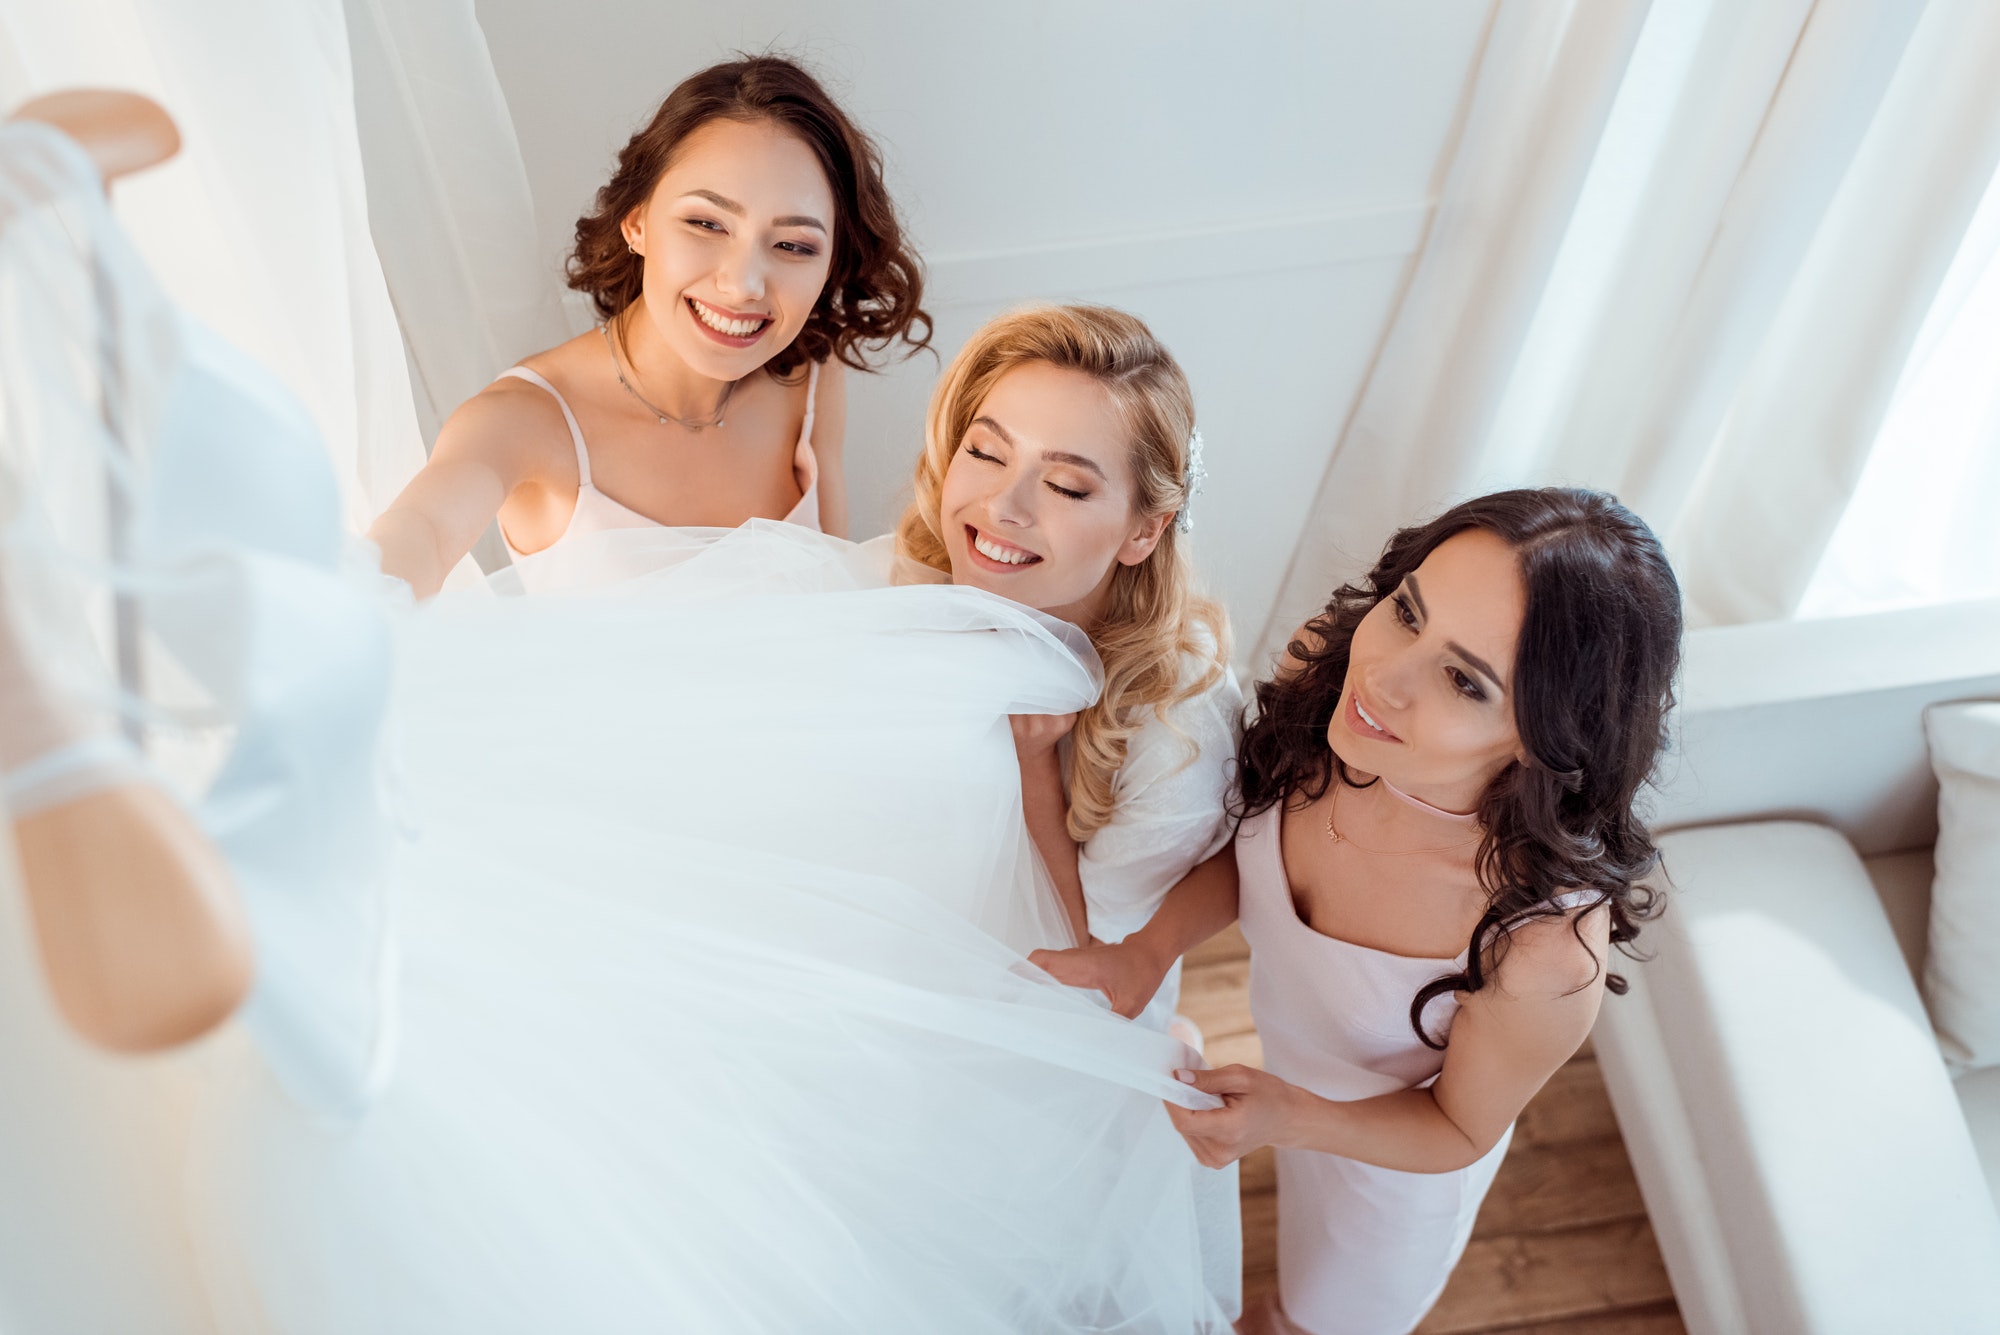 beautiful excited bride with bridesmaids touching wedding dress